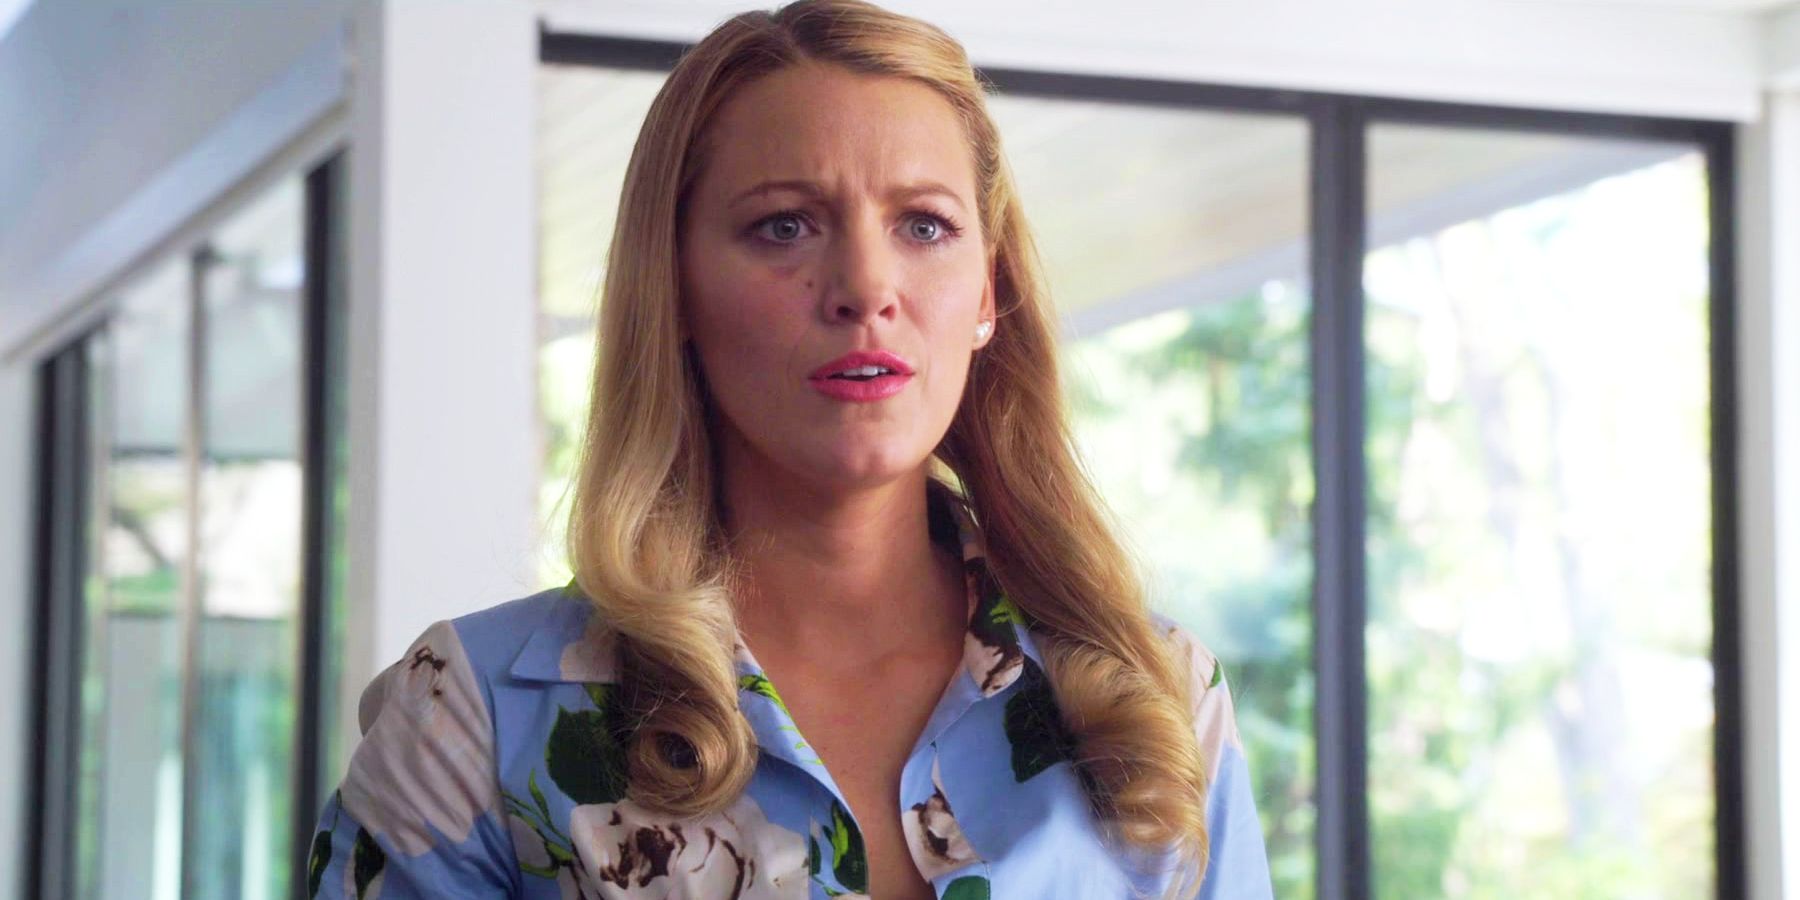 Blake Lively as Emily Nelson looking surprised in A Simple Favor